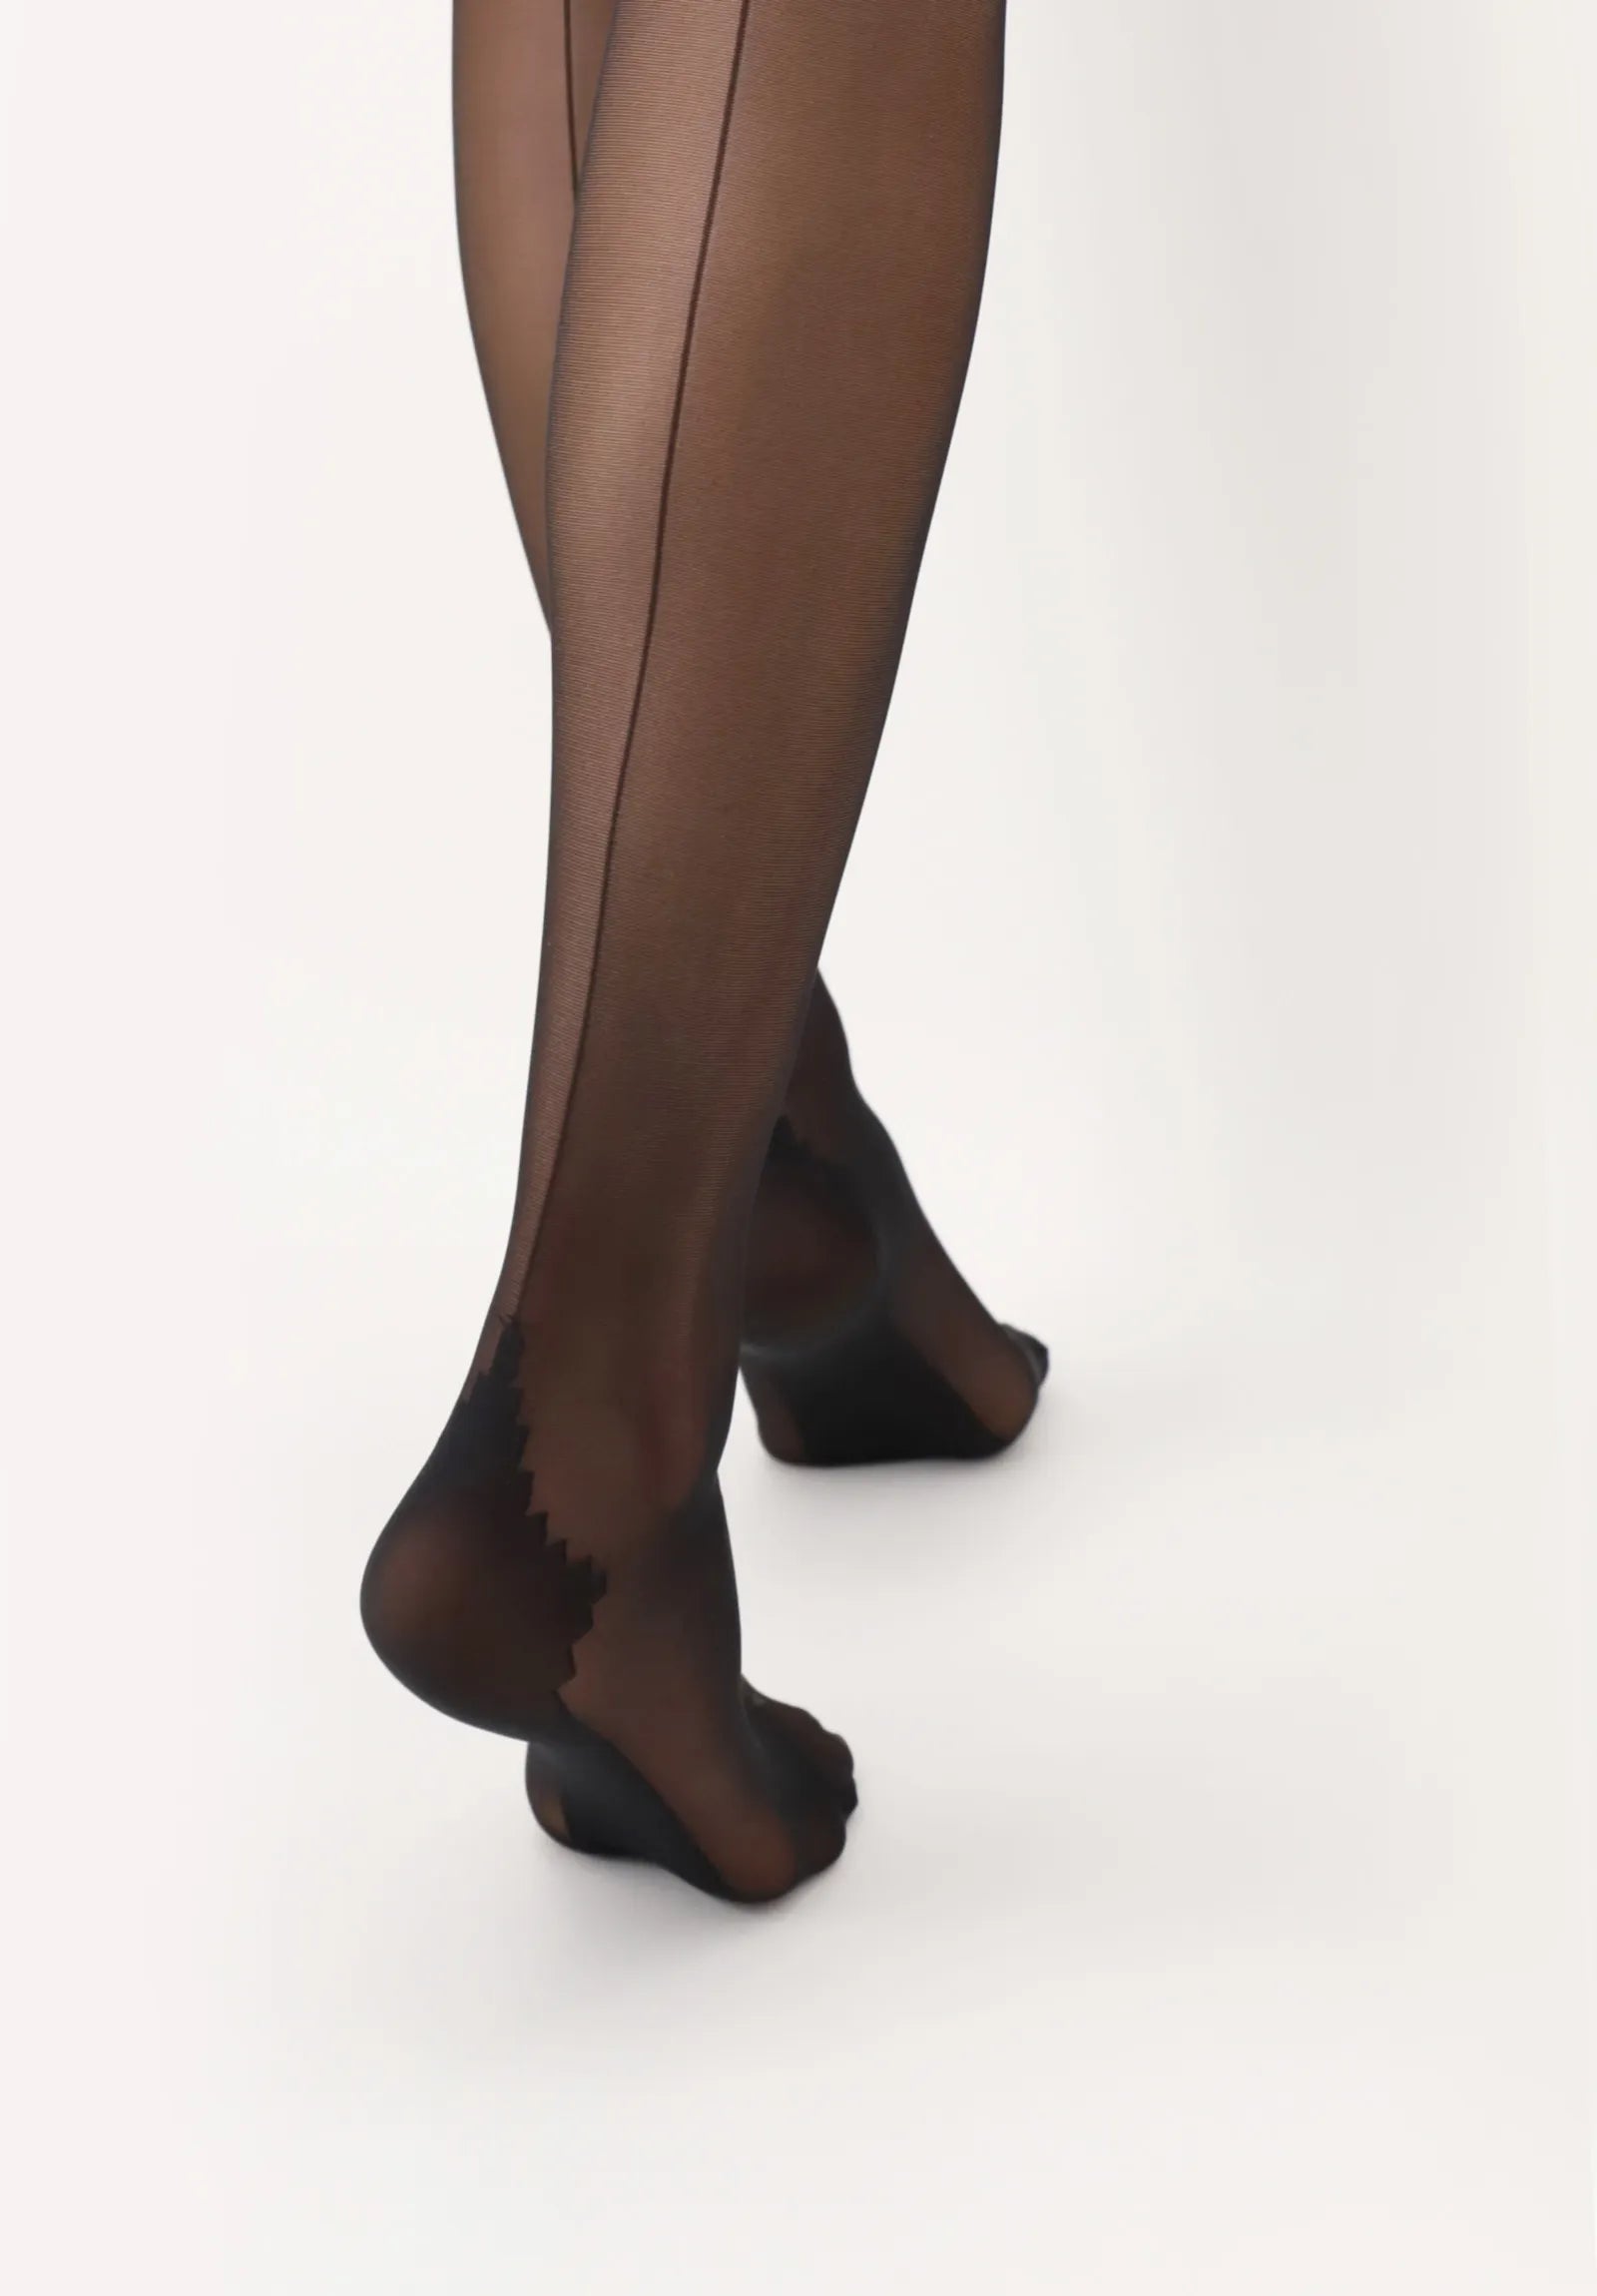 OroblÌ_ Stay Up Riga 20 - Sheer black hold-ups with back seam stripe, plain top with silicone strips and reinforced toe.